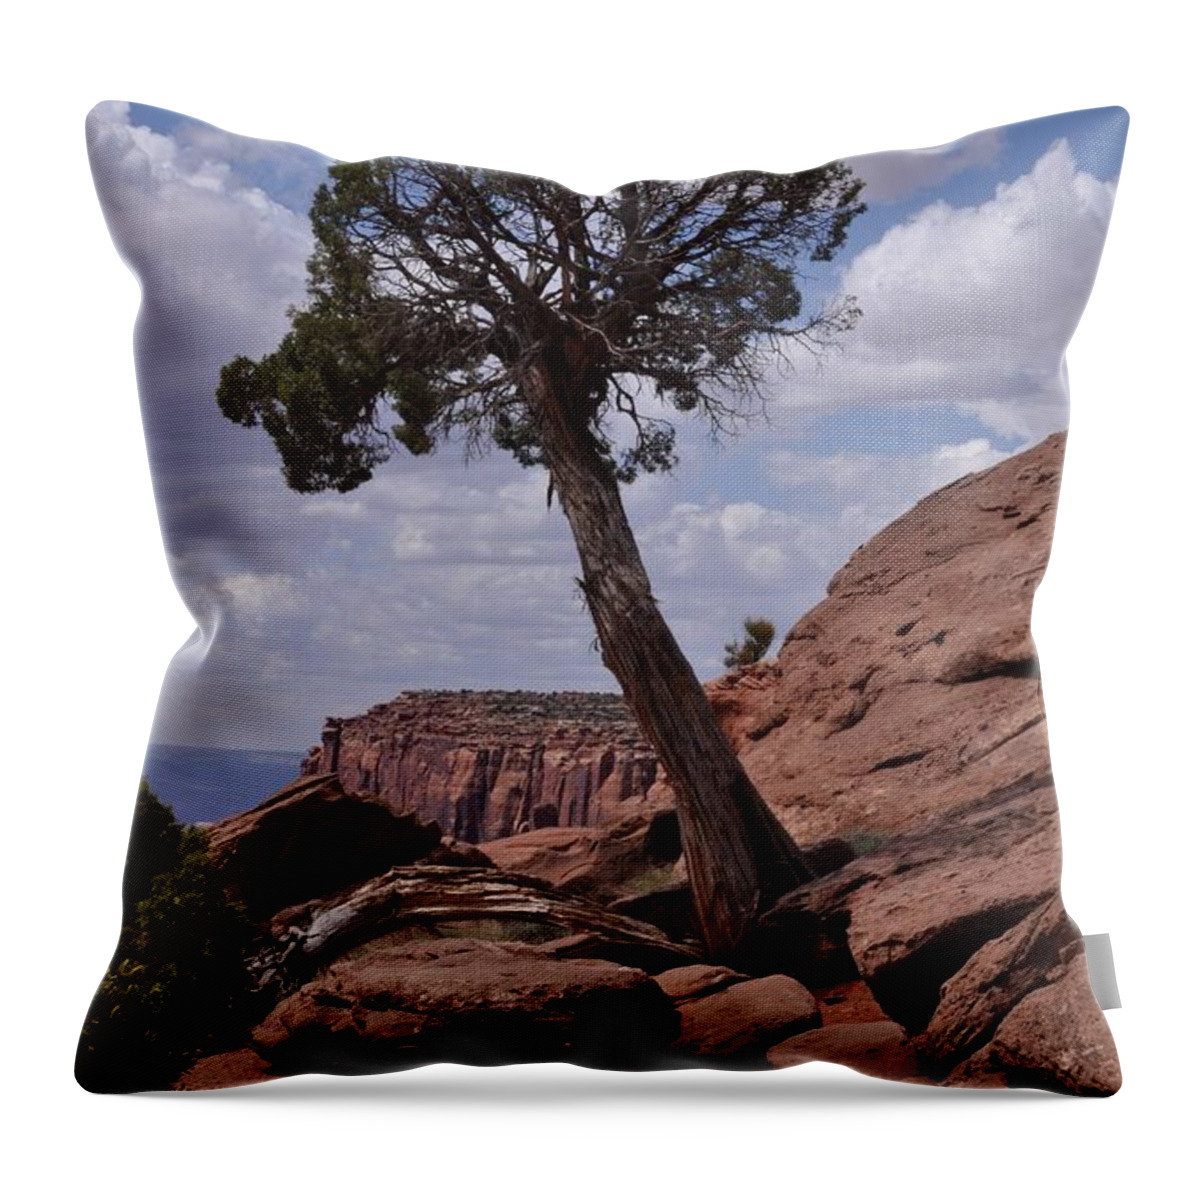 Canyonlands National Park Throw Pillow featuring the photograph A Lone Tree by Frank Madia